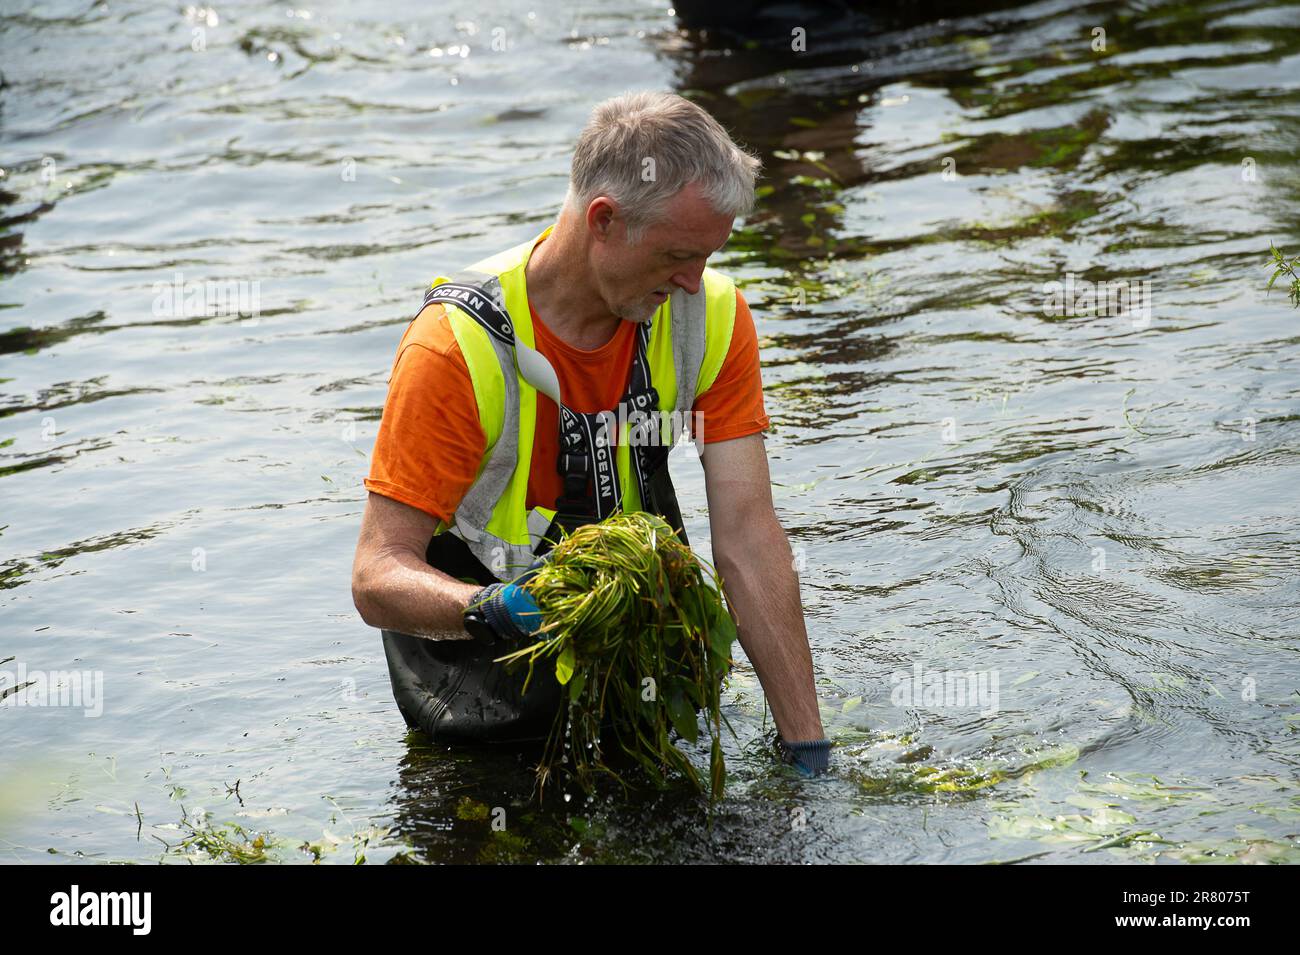 Eton Wick, UK. 18th June, 2023. Local residents and volunteers from the Eton Wick Waterways Group near Windsor in Berkshire who are supported by Thames 21, were clearing weeds from Boveney Ditch in Eton Wick today so as to improve the flow of water in the waterway. They work to conserve and protect  the natural environment and wildlife surrounding the Eton Wick waterways. Joining them to clear the weeds were newly elected Windsor, Eton and Eton Wick Liberal Democrats Councillors, Devon Davies and Mark Wilson (pictured). Frank O’Kelly a Councillor from nearby Slough also joined the clear up. Et Stock Photo